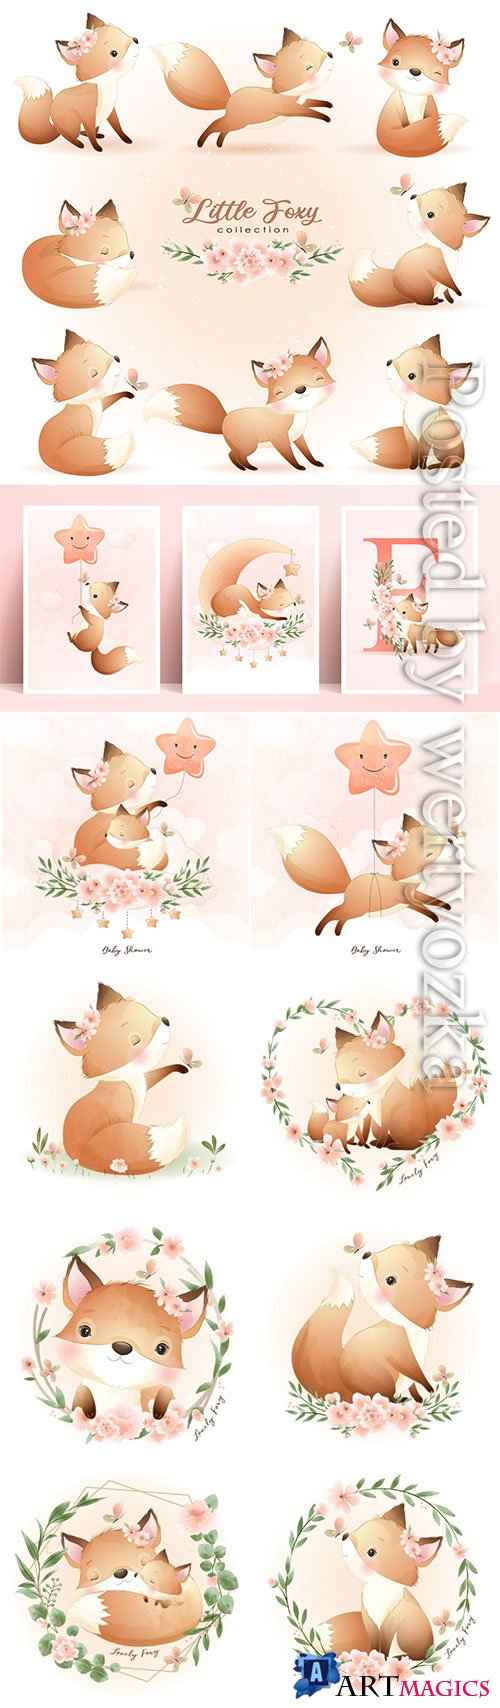 Cute doodle foxy poses with floral illustration premium vector